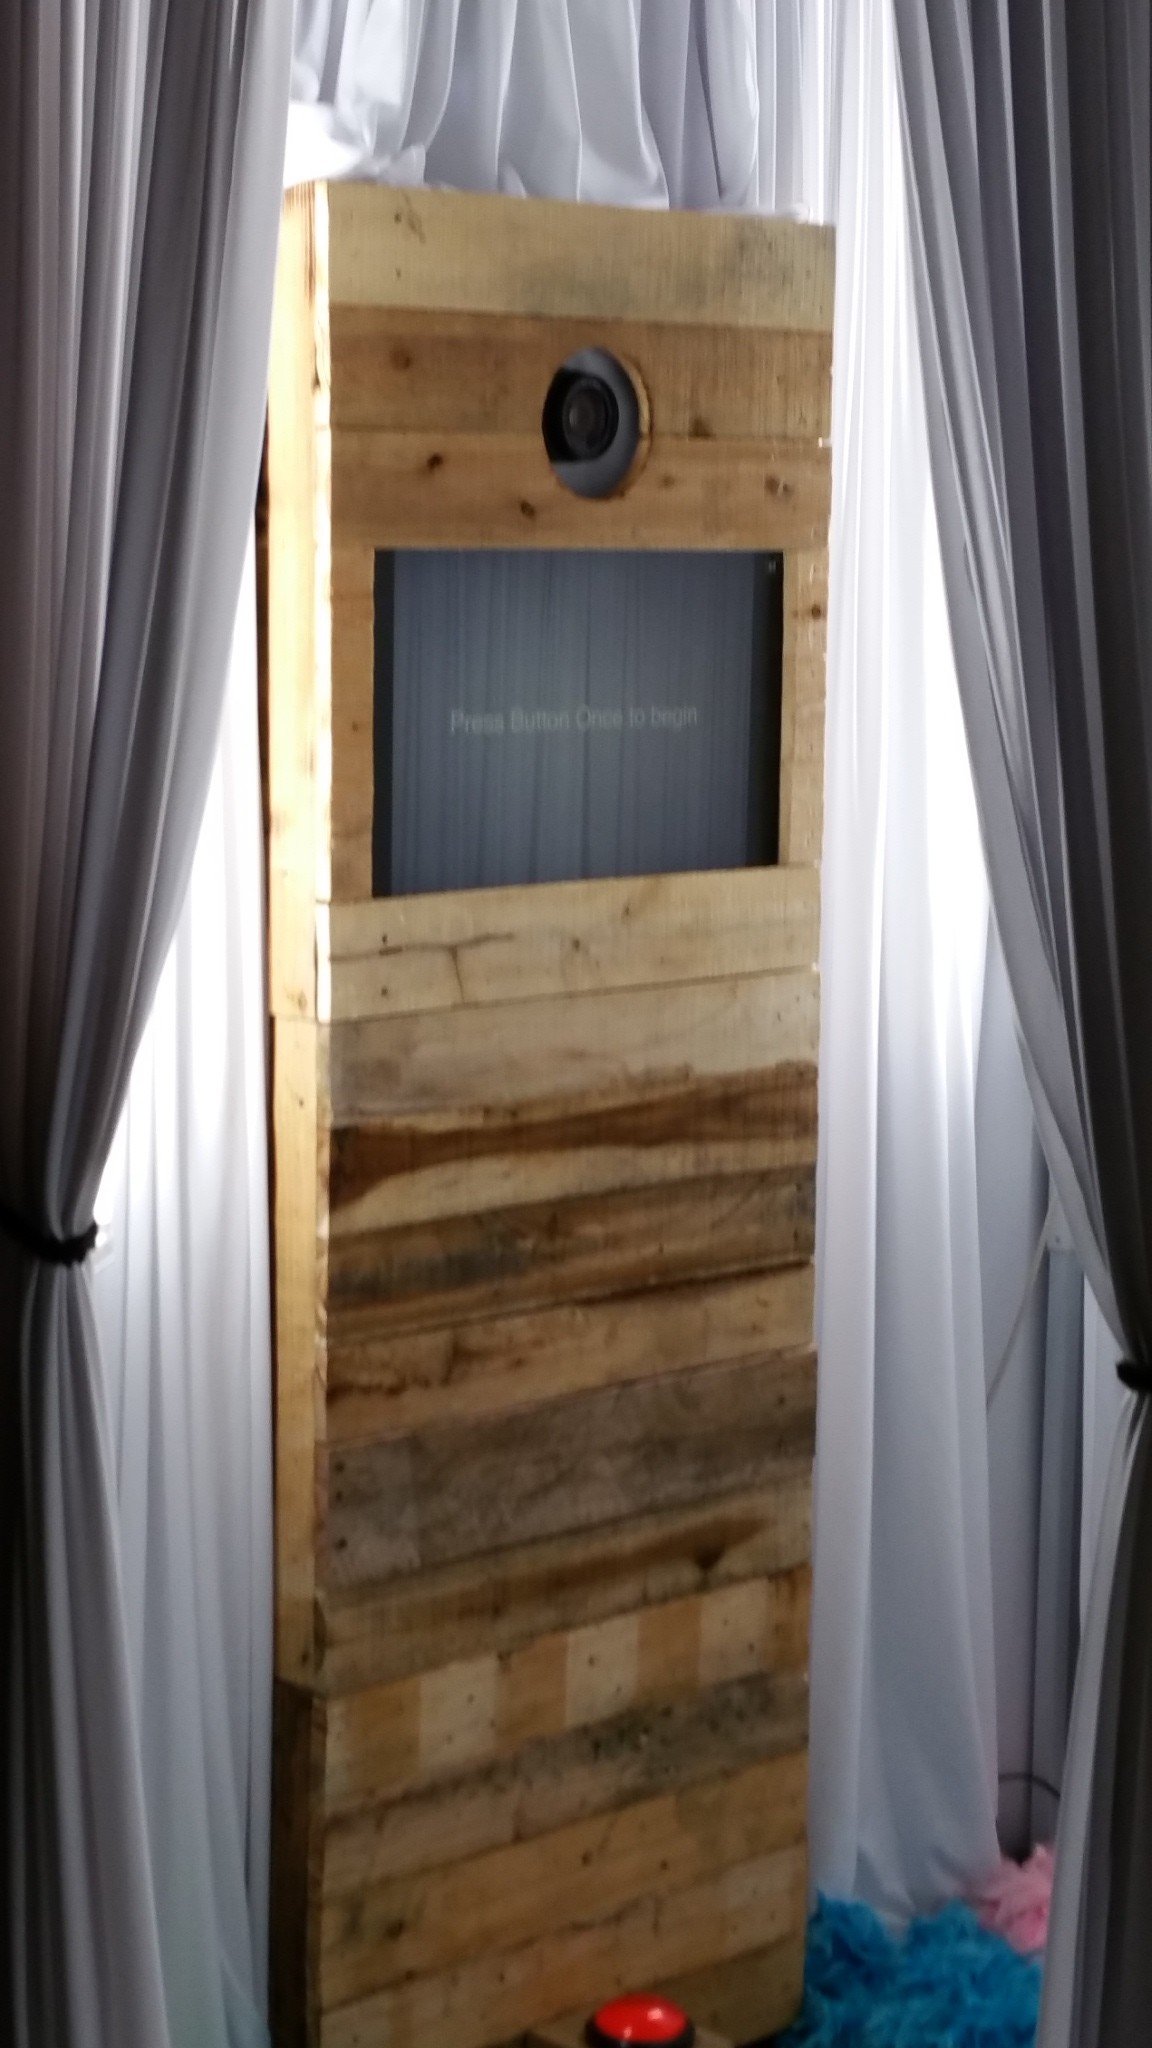 Photo Booth made from recycle pallet wood